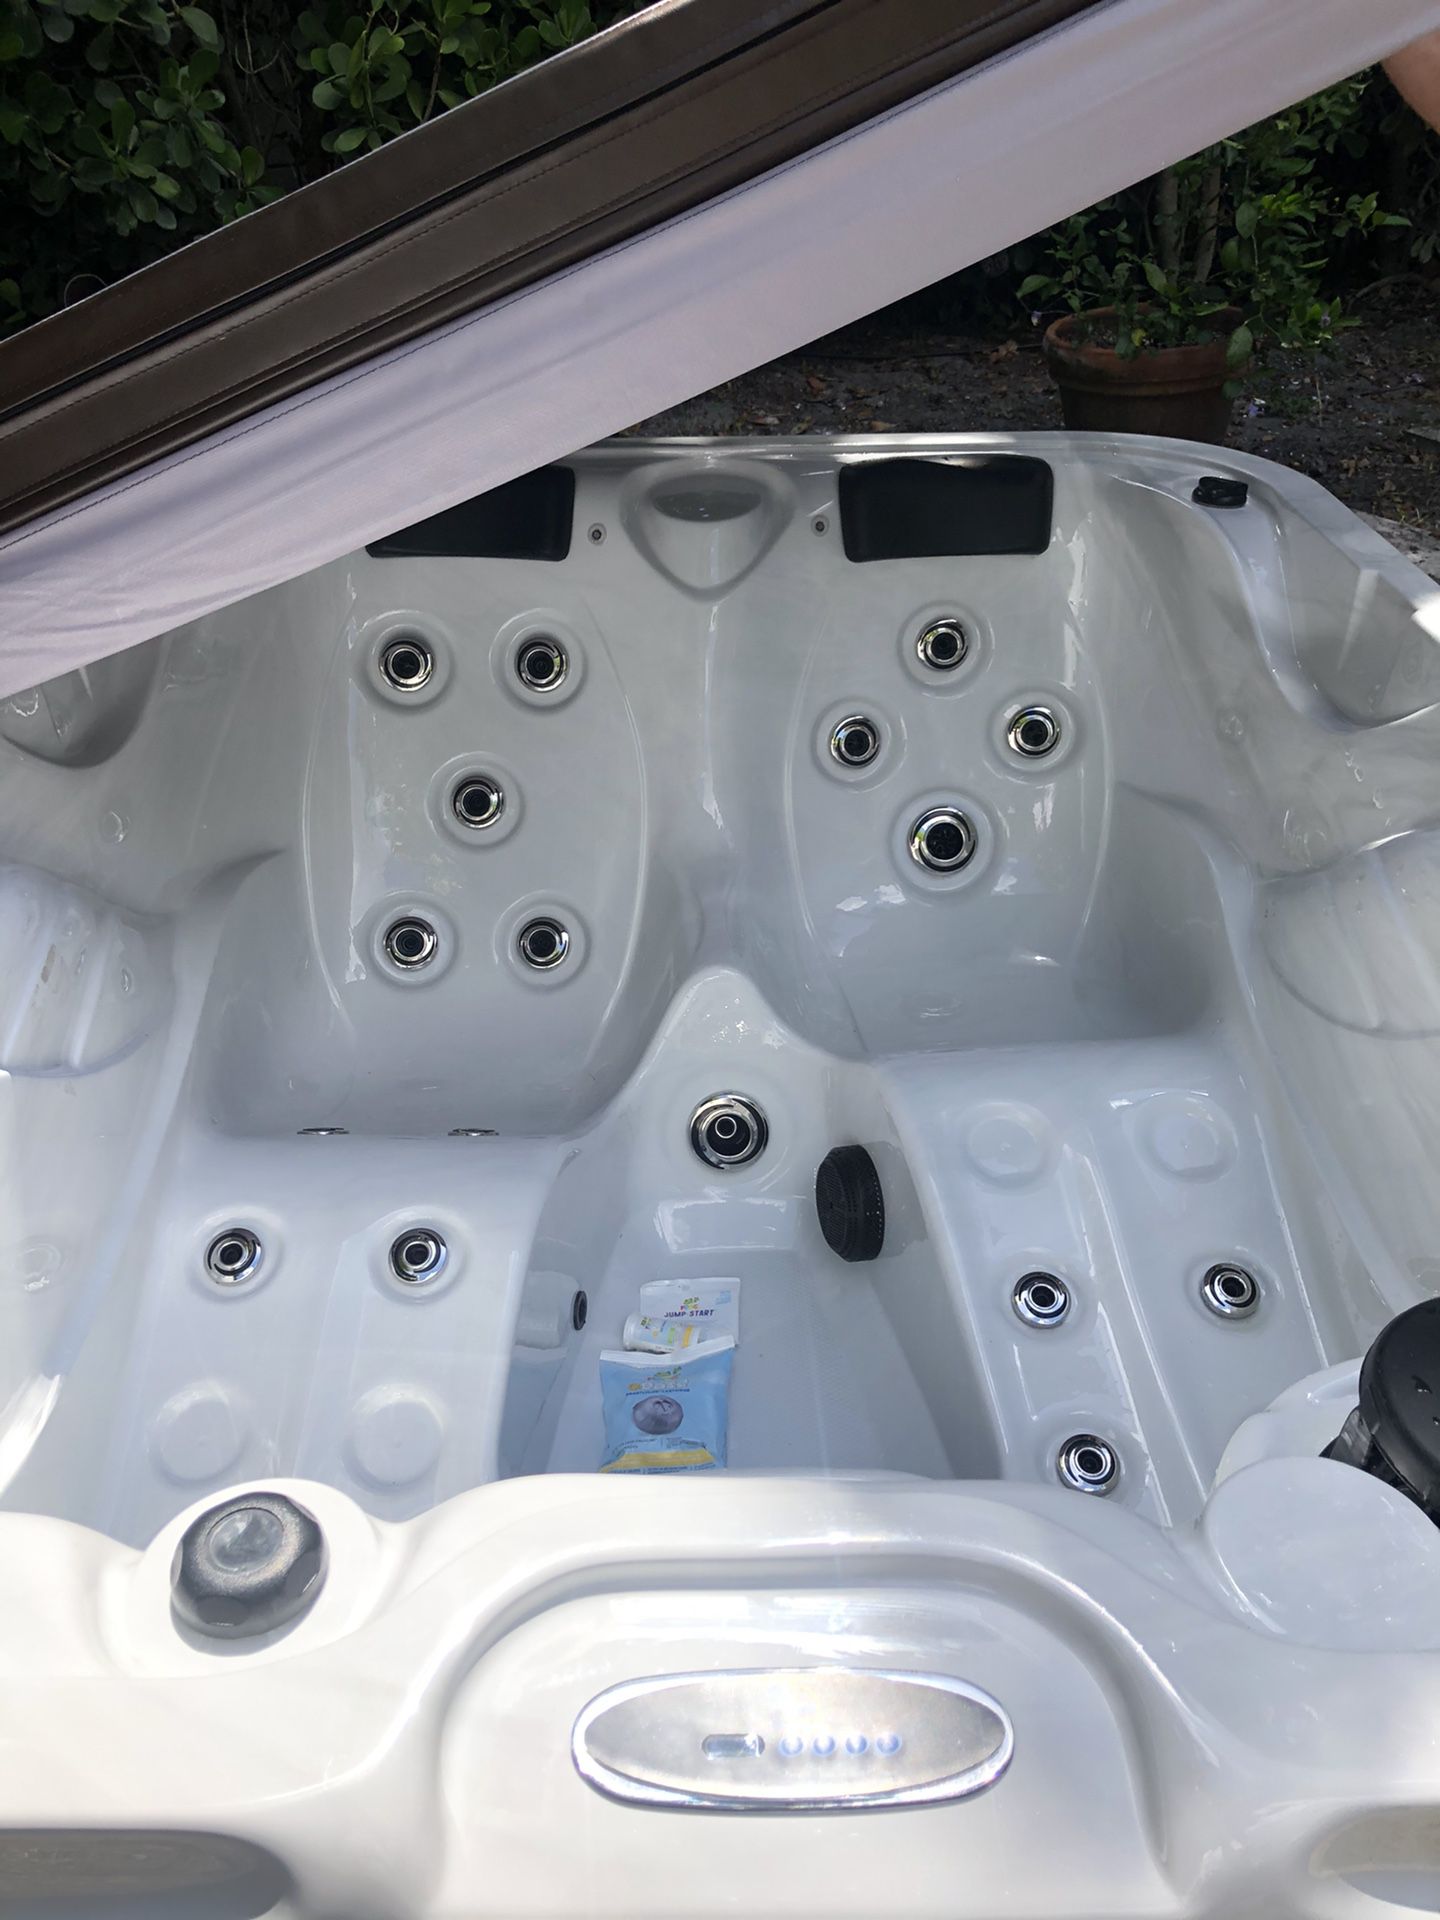 New never used Signature Spa NSS-3 dual-lounger white jacuzzi hot tub spa therapy jets made in the USA